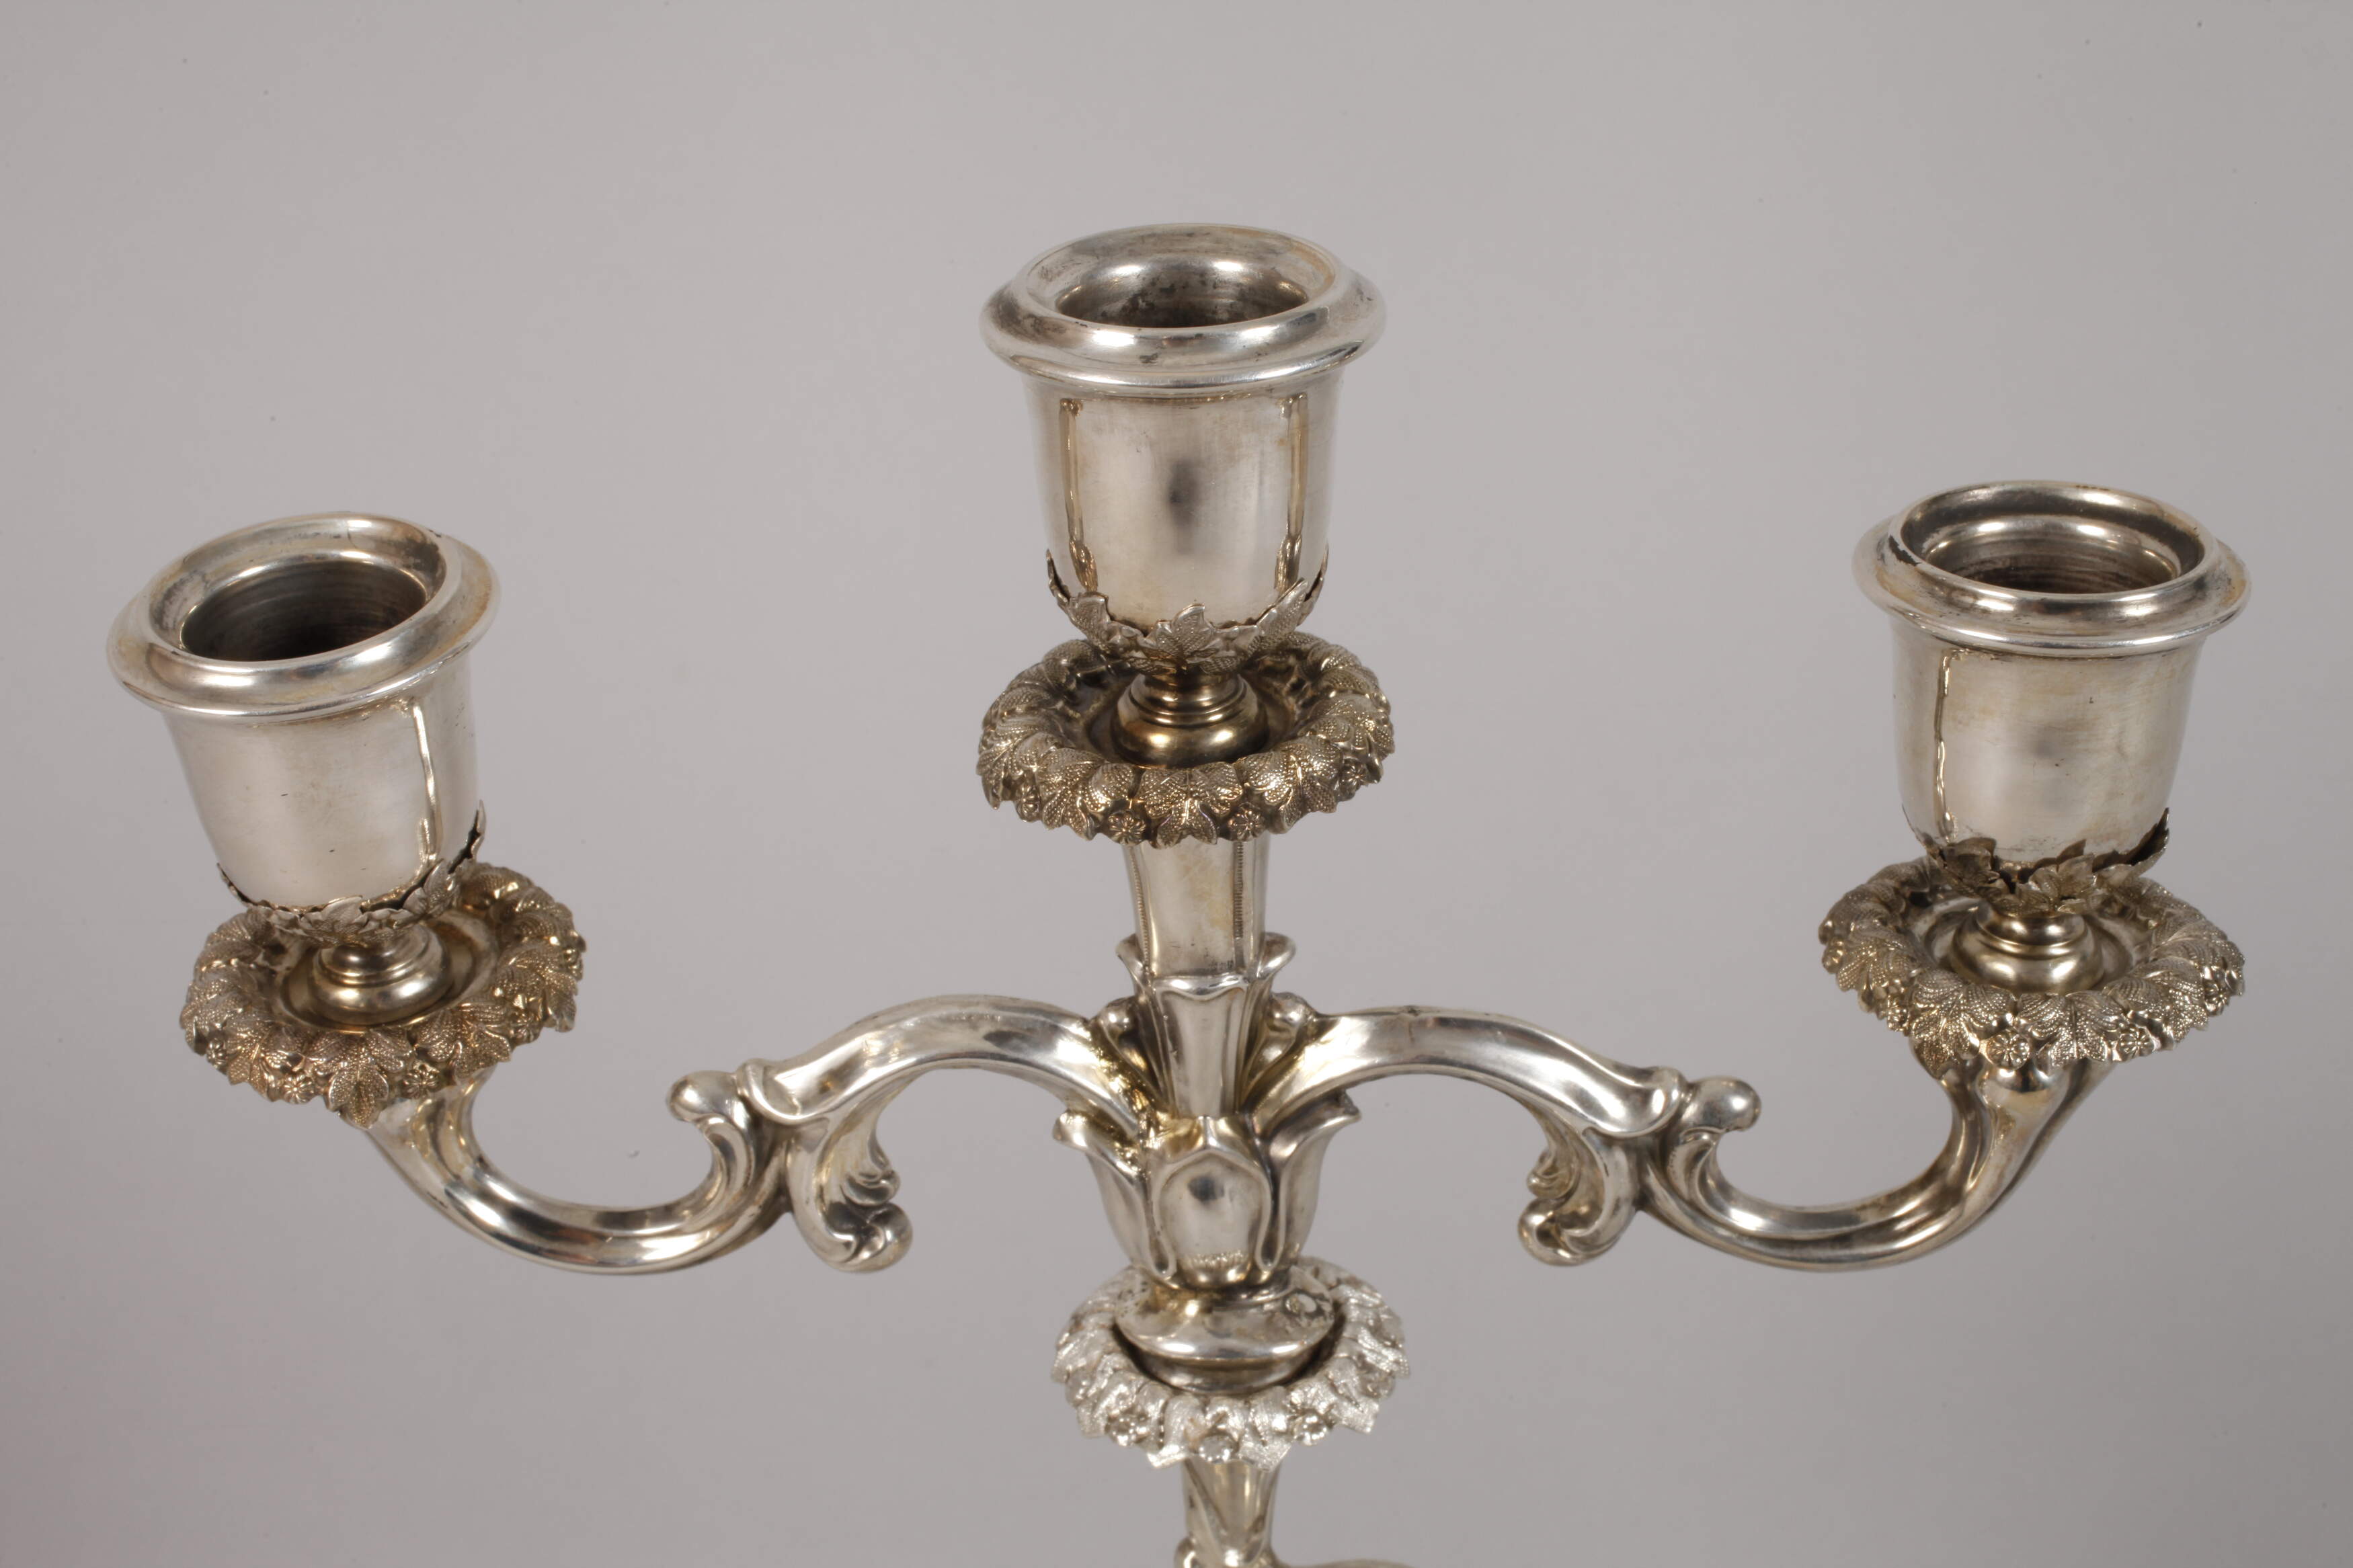 Pair of candlesticks silver - Image 2 of 5